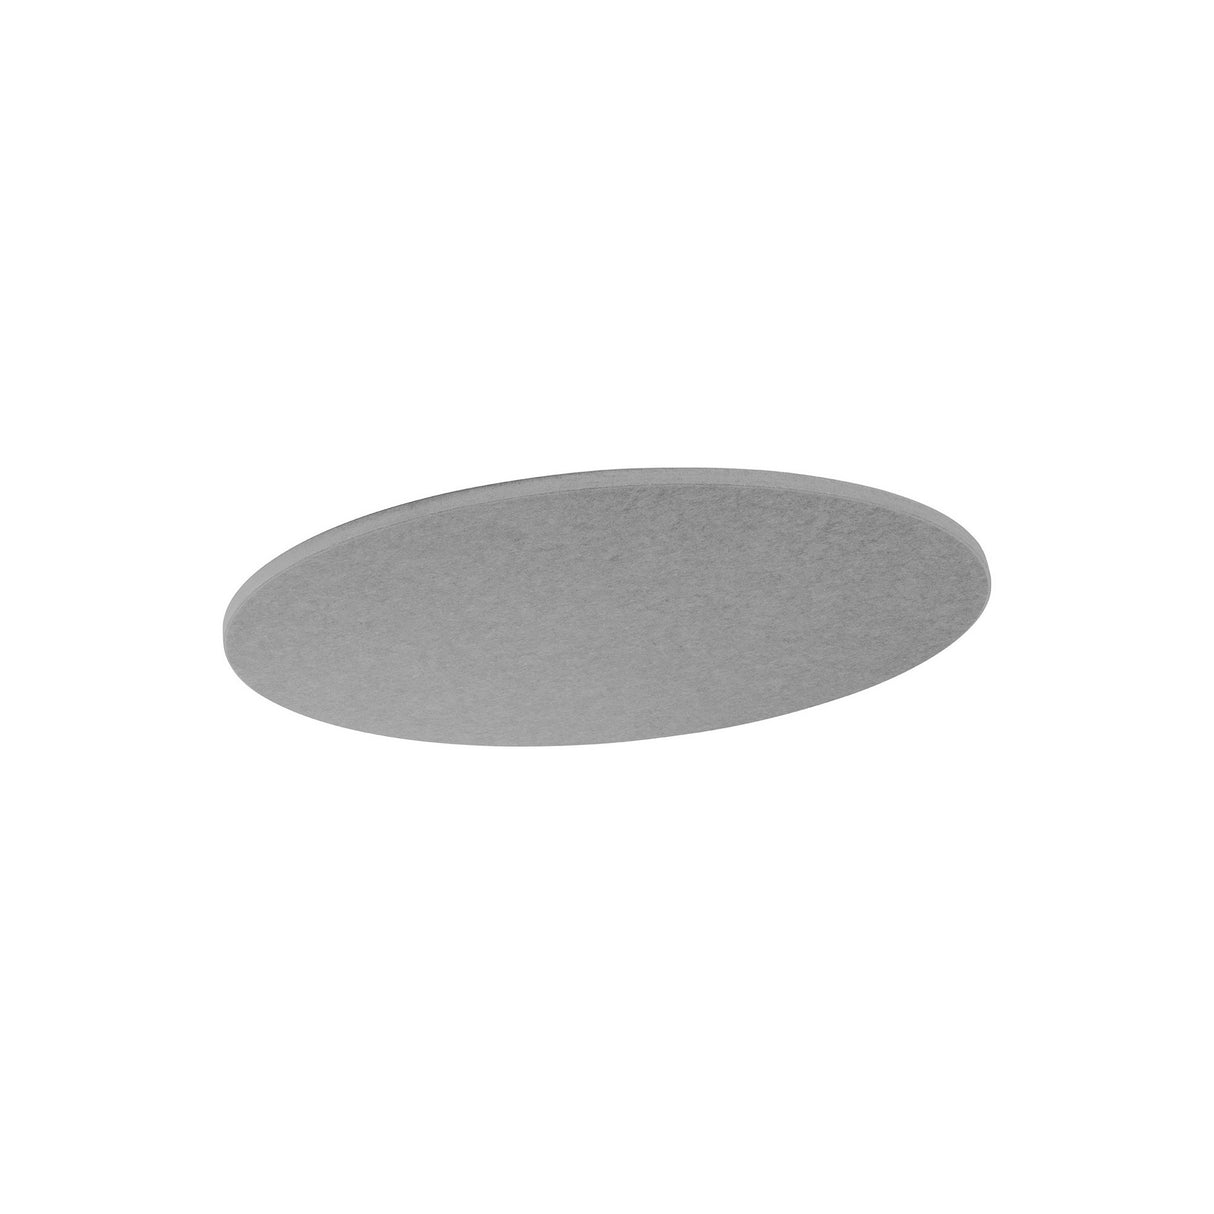 Primacoustic EcoScapes Round Cloud 33-Inch Micro-Beveled Edge Wall Panel, Slate 2-Pack